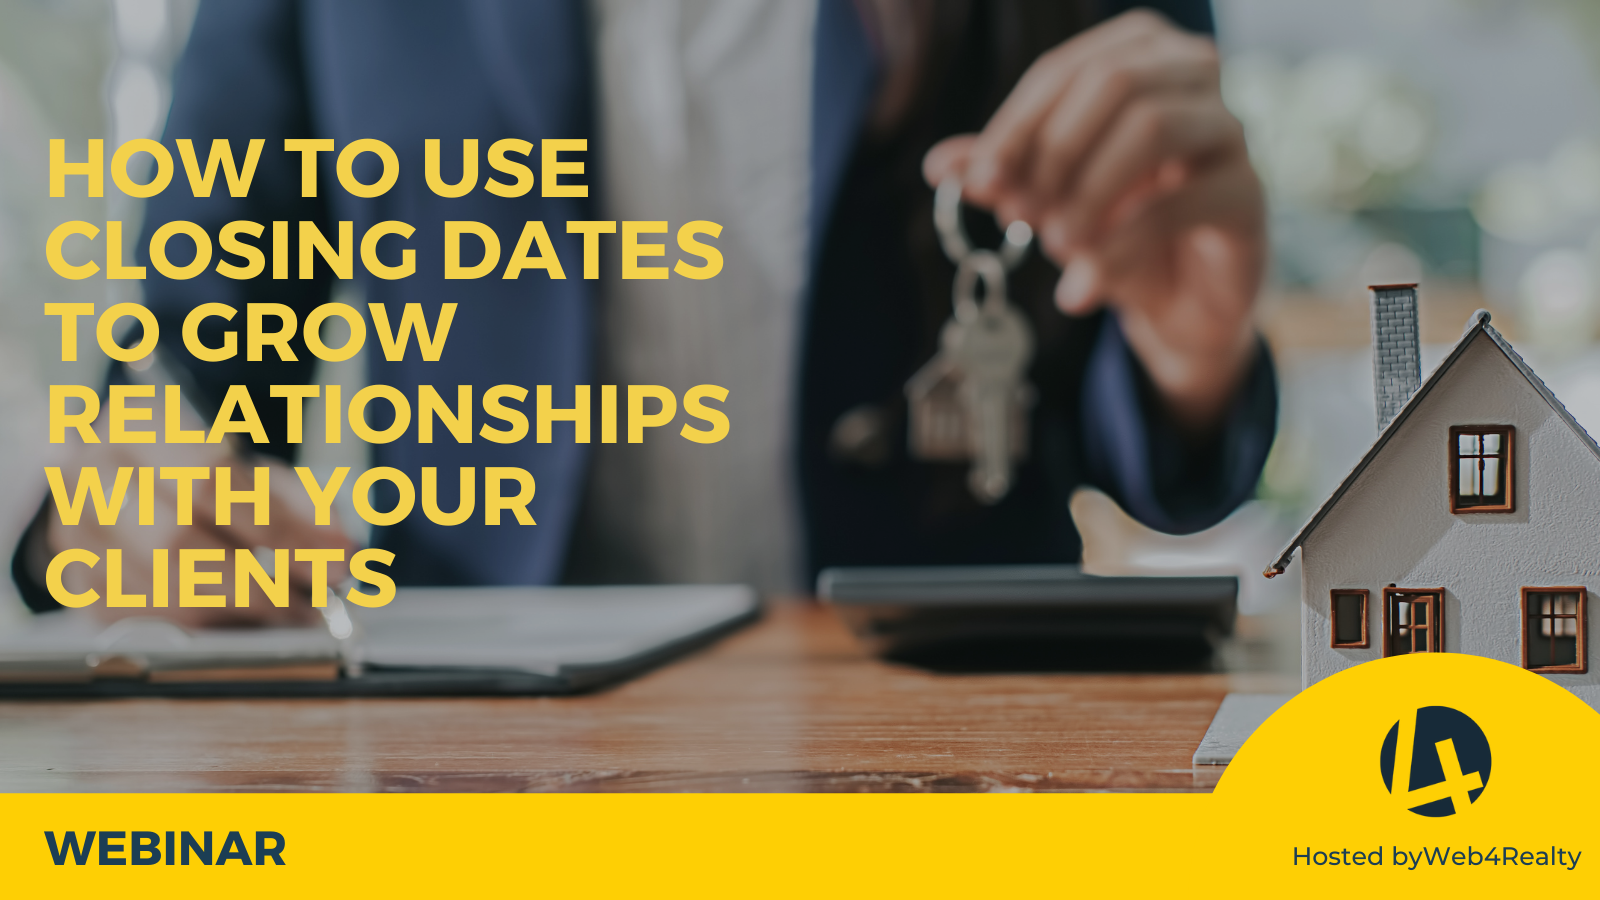 Use Closing Dates to Build Relationships